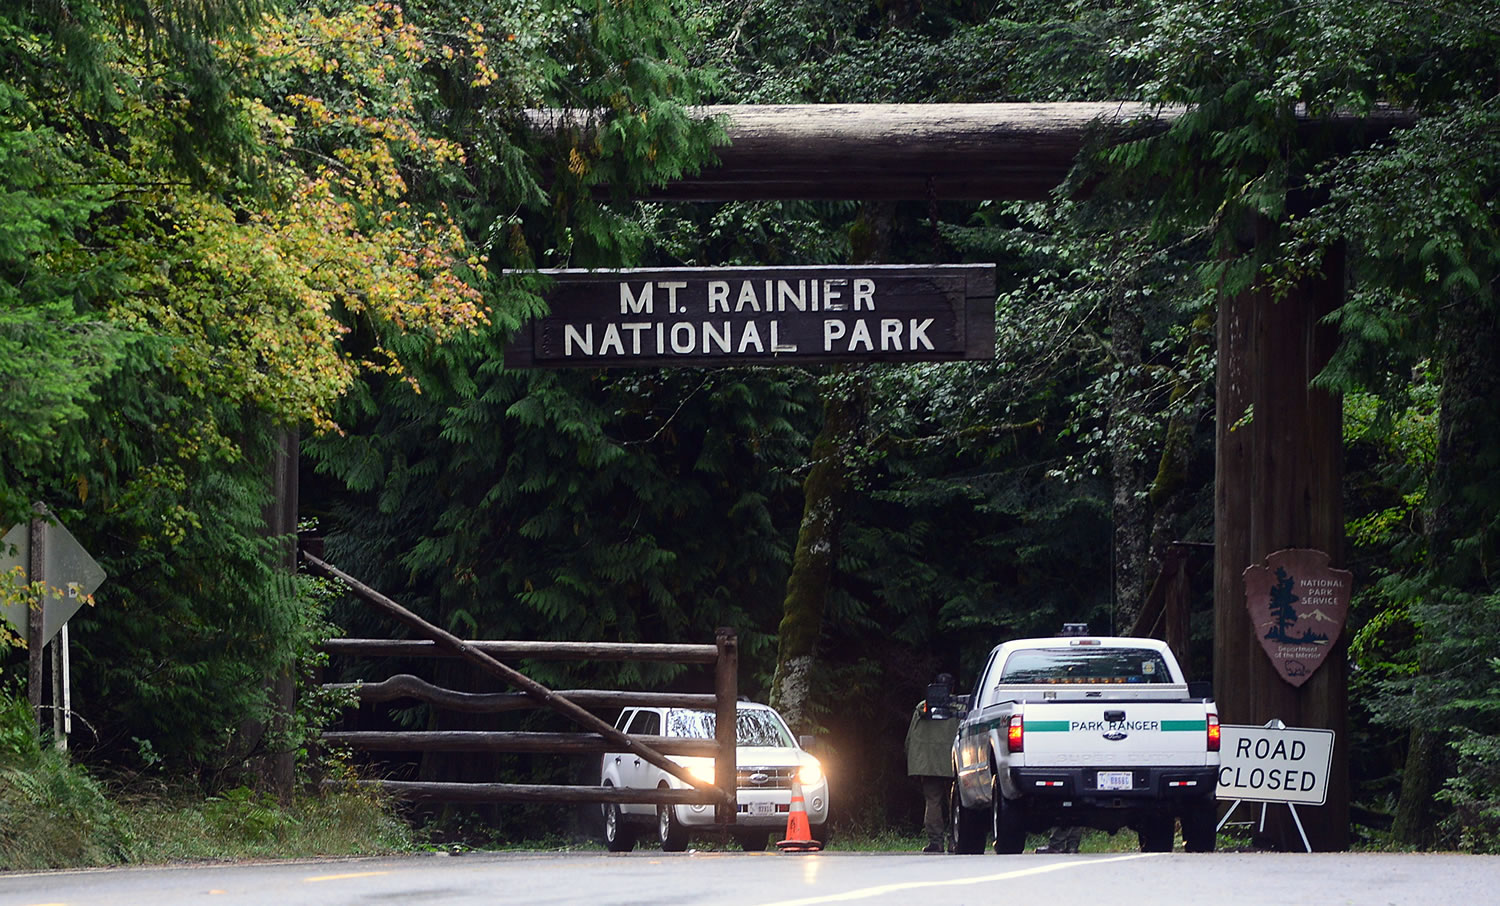 Pete Caster/The Chronicle/AP - Mt. Rainier National Park personnel close the gate to the park near Ashford on the afternoon of Oct. 1.